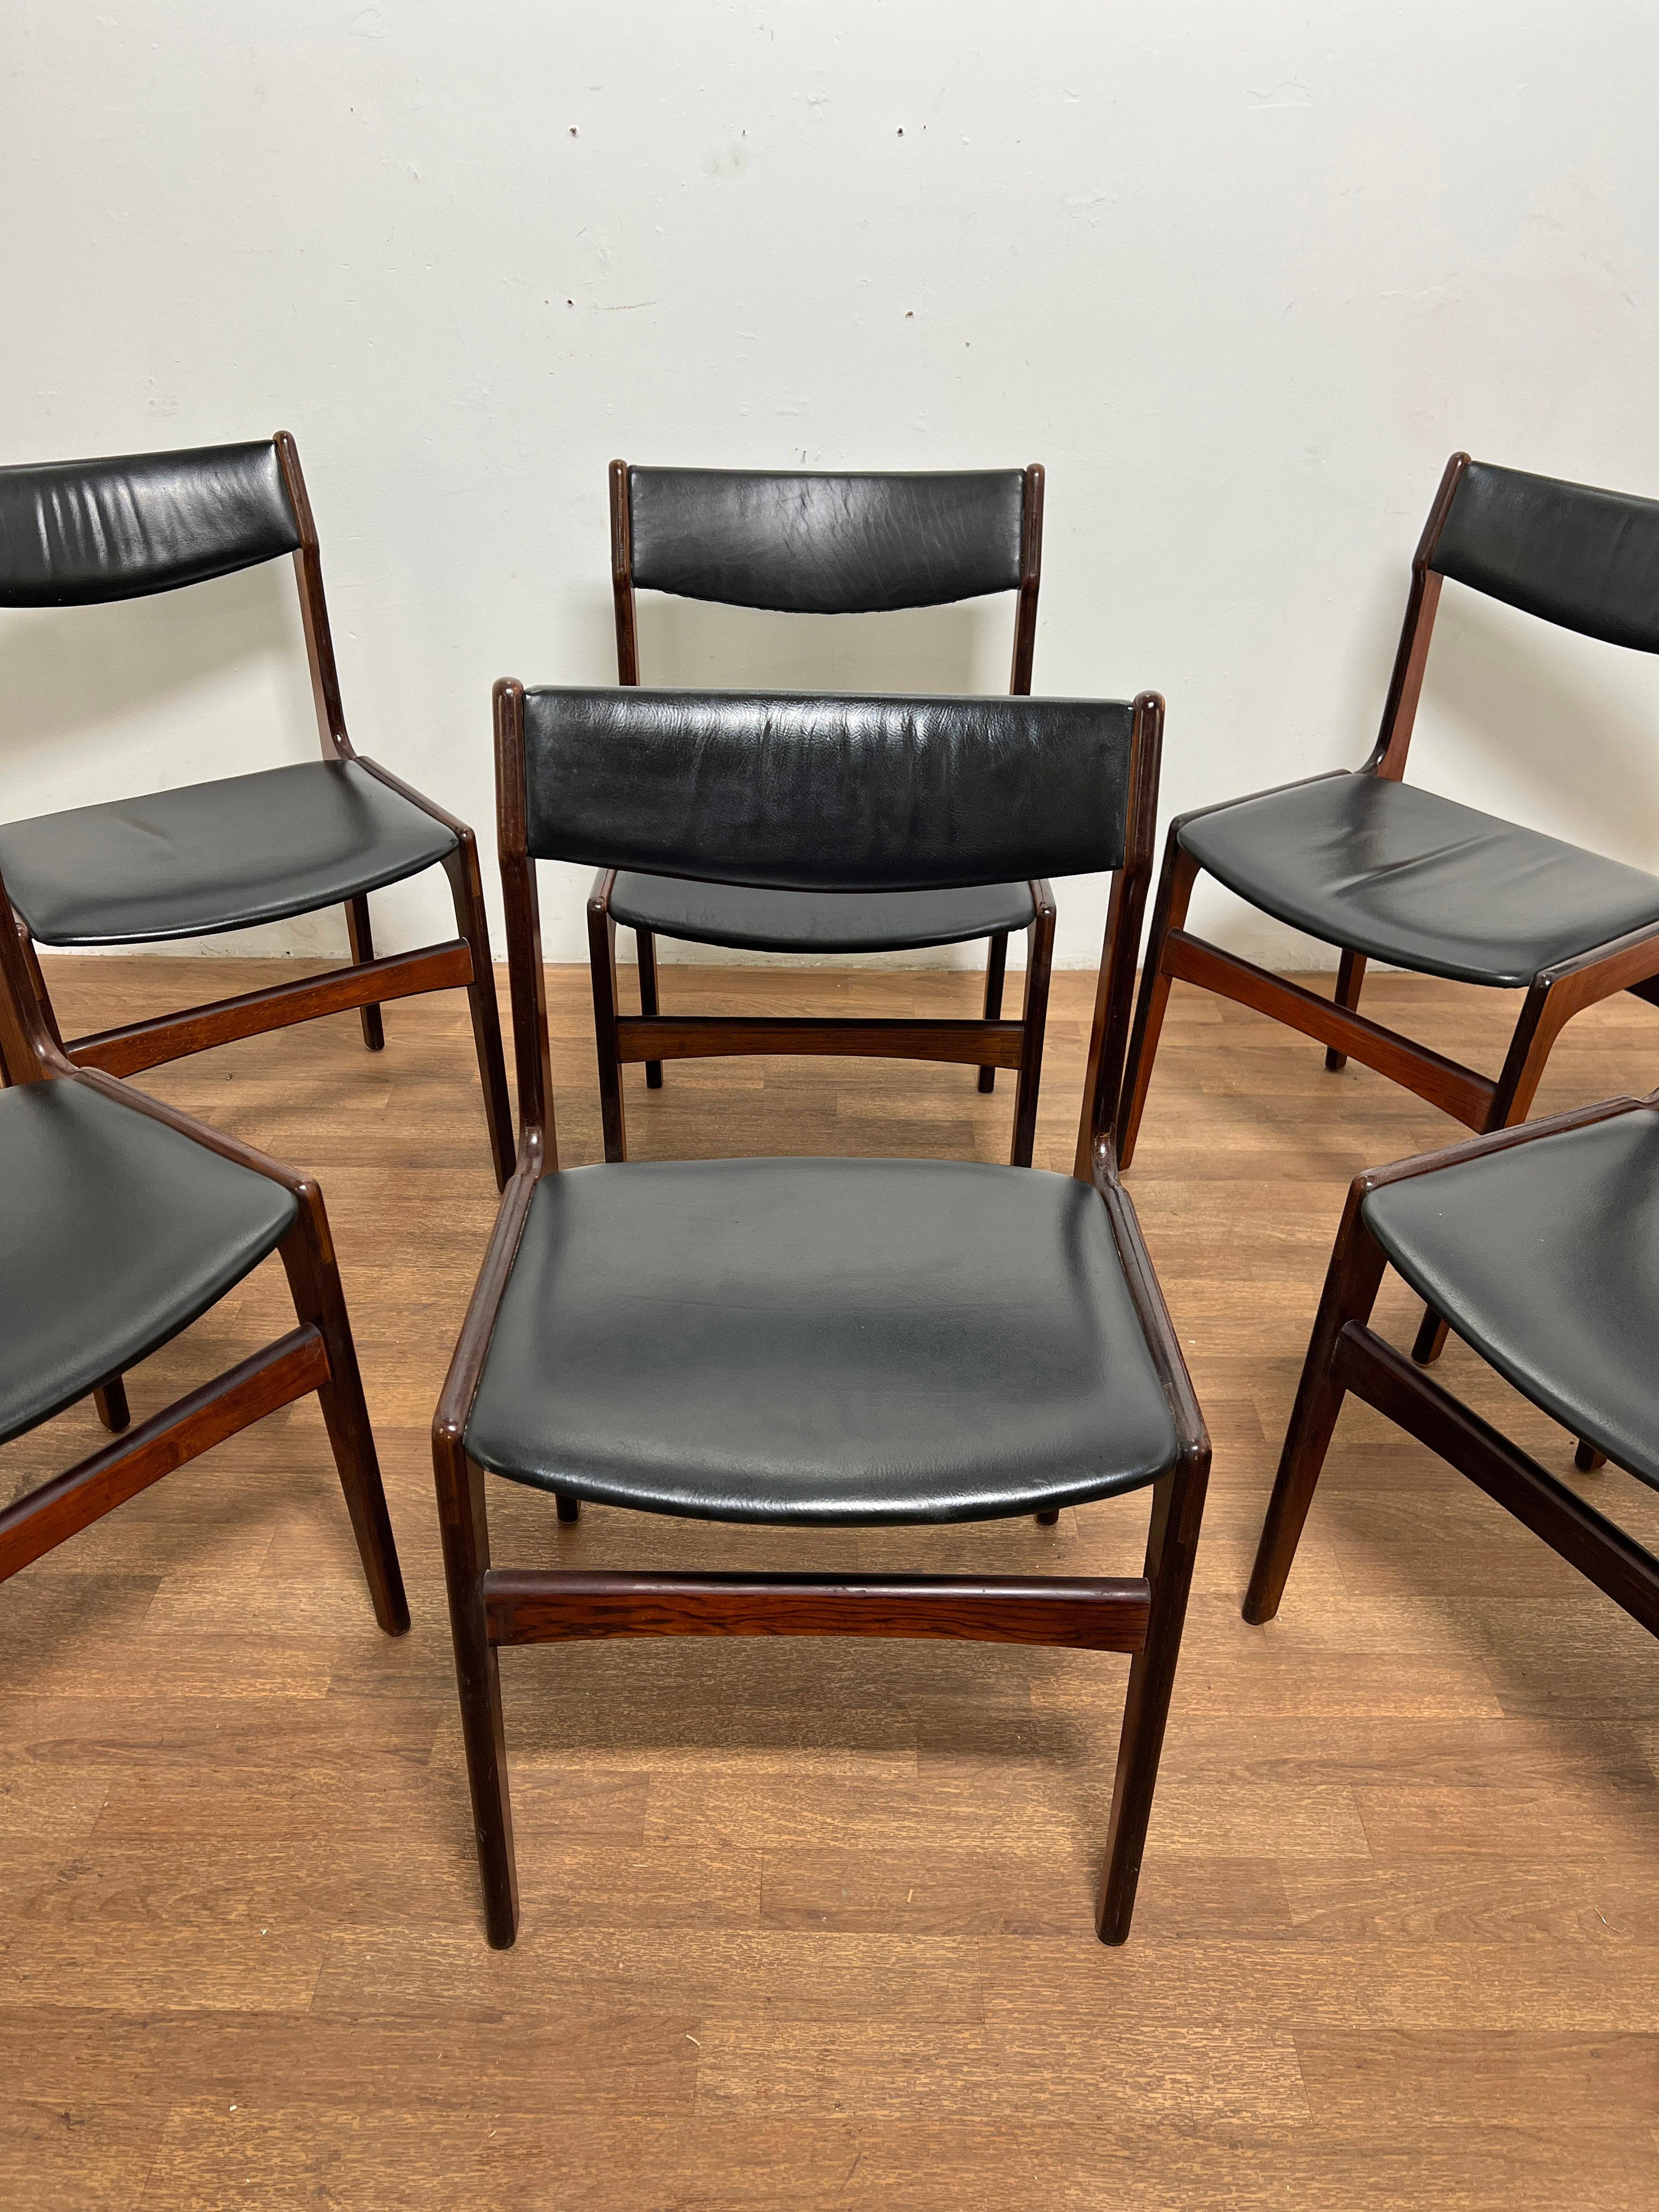 Set of six Danish dining chairs in rosewood with original leather upholstery designed by Erik Buch for Oddense Maskinsnedkeri, circa 1960s.